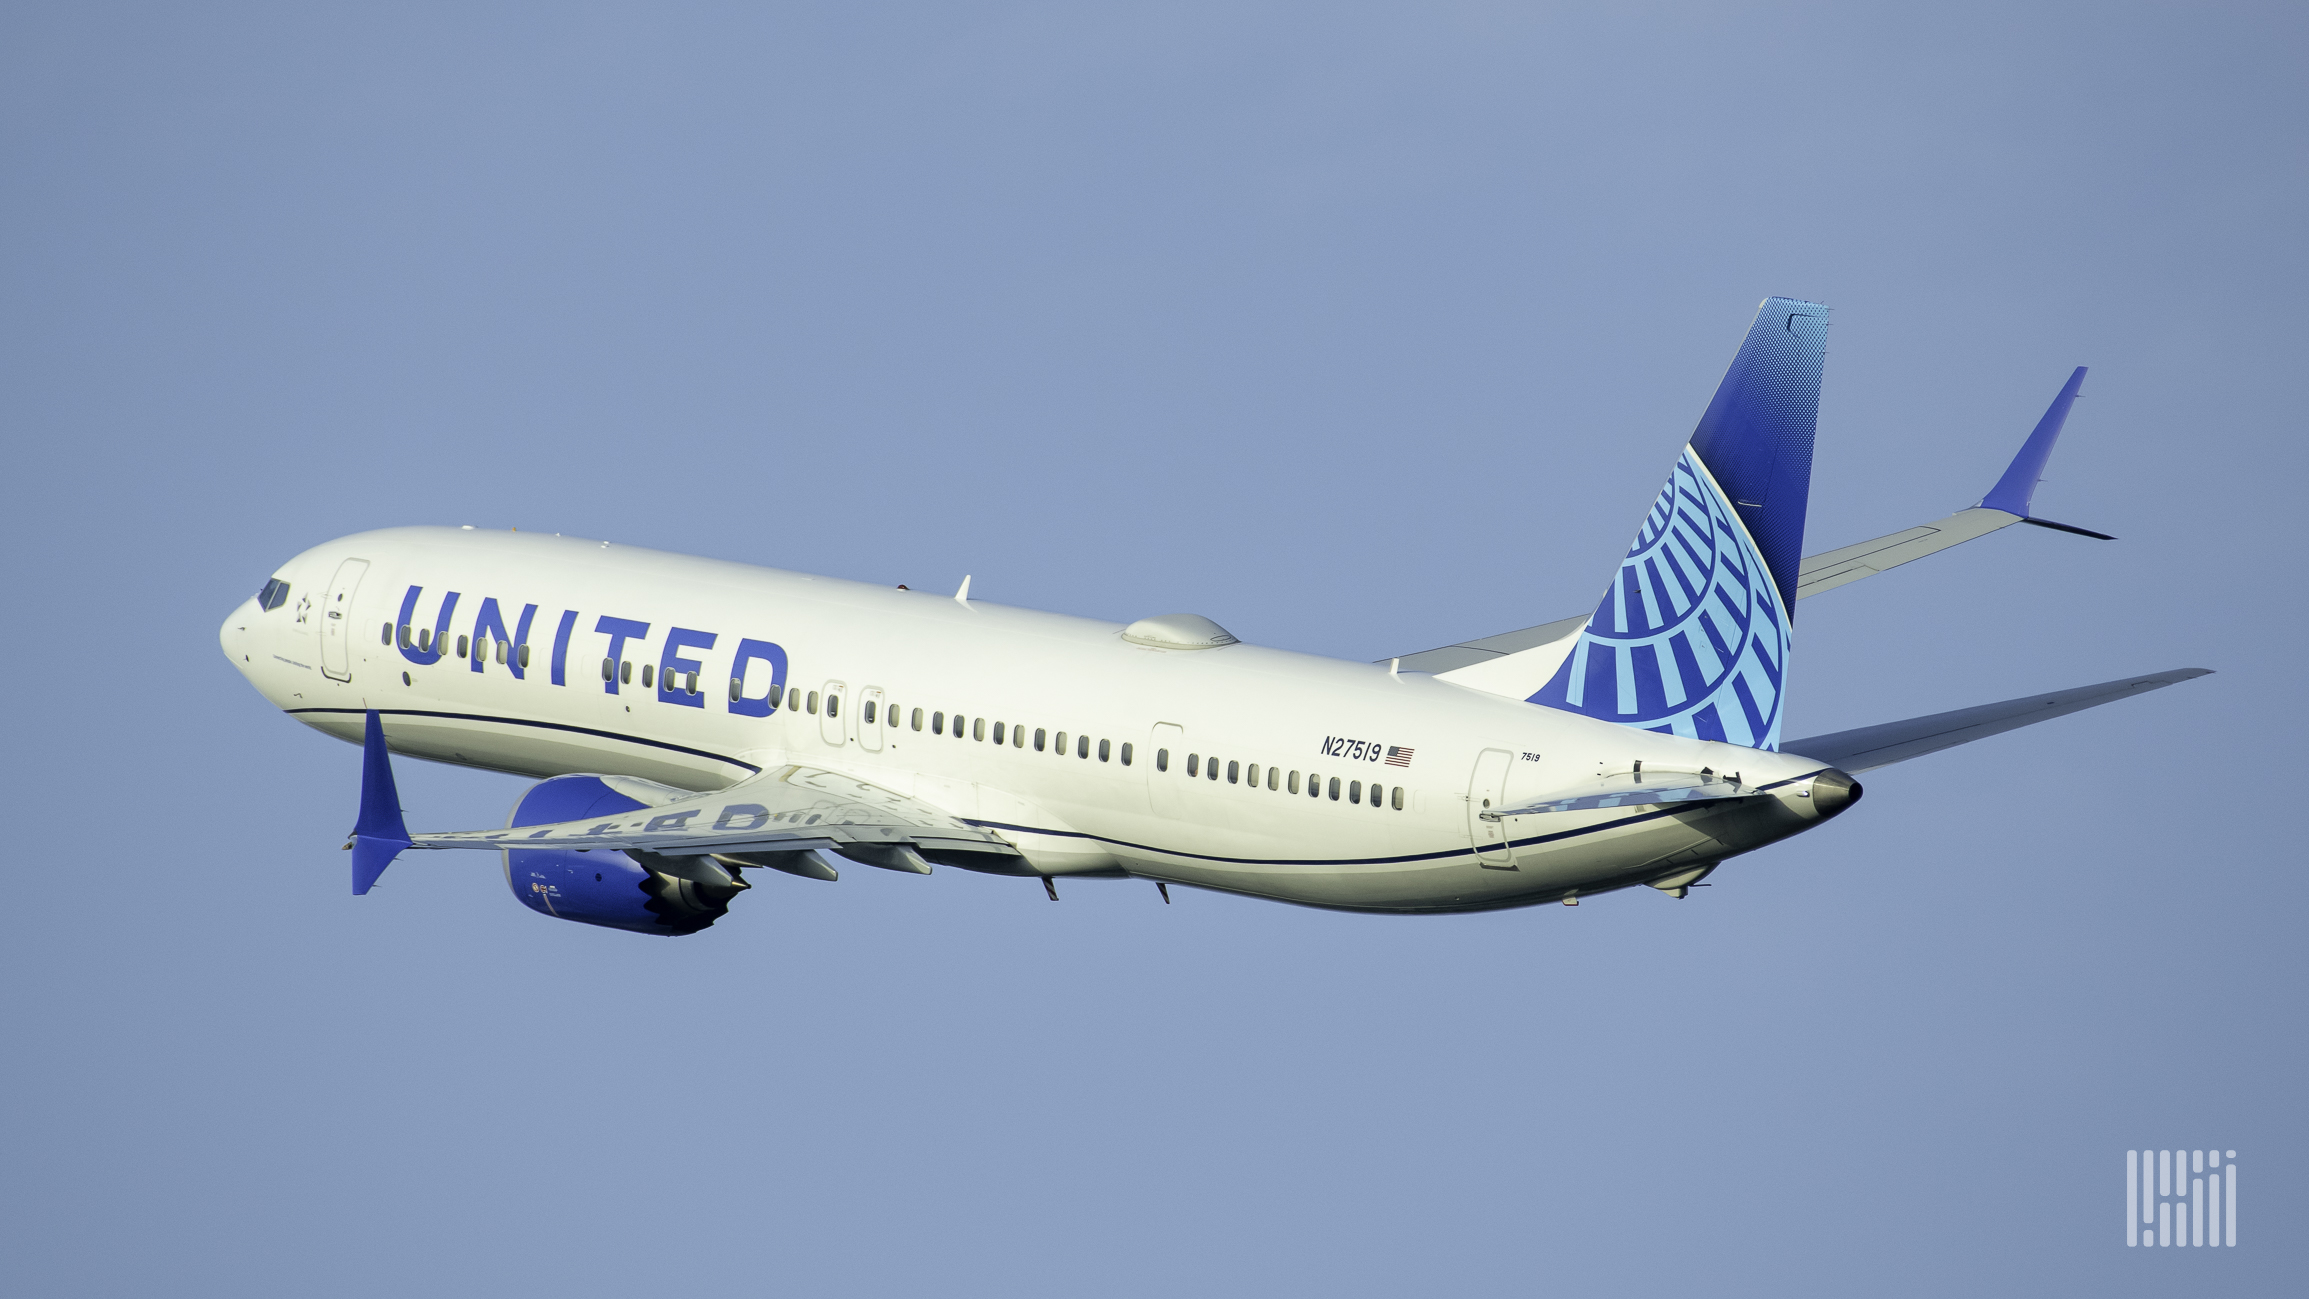 A white United Airlines jet with a blue tail flying into the blue sky heading away from the camera.